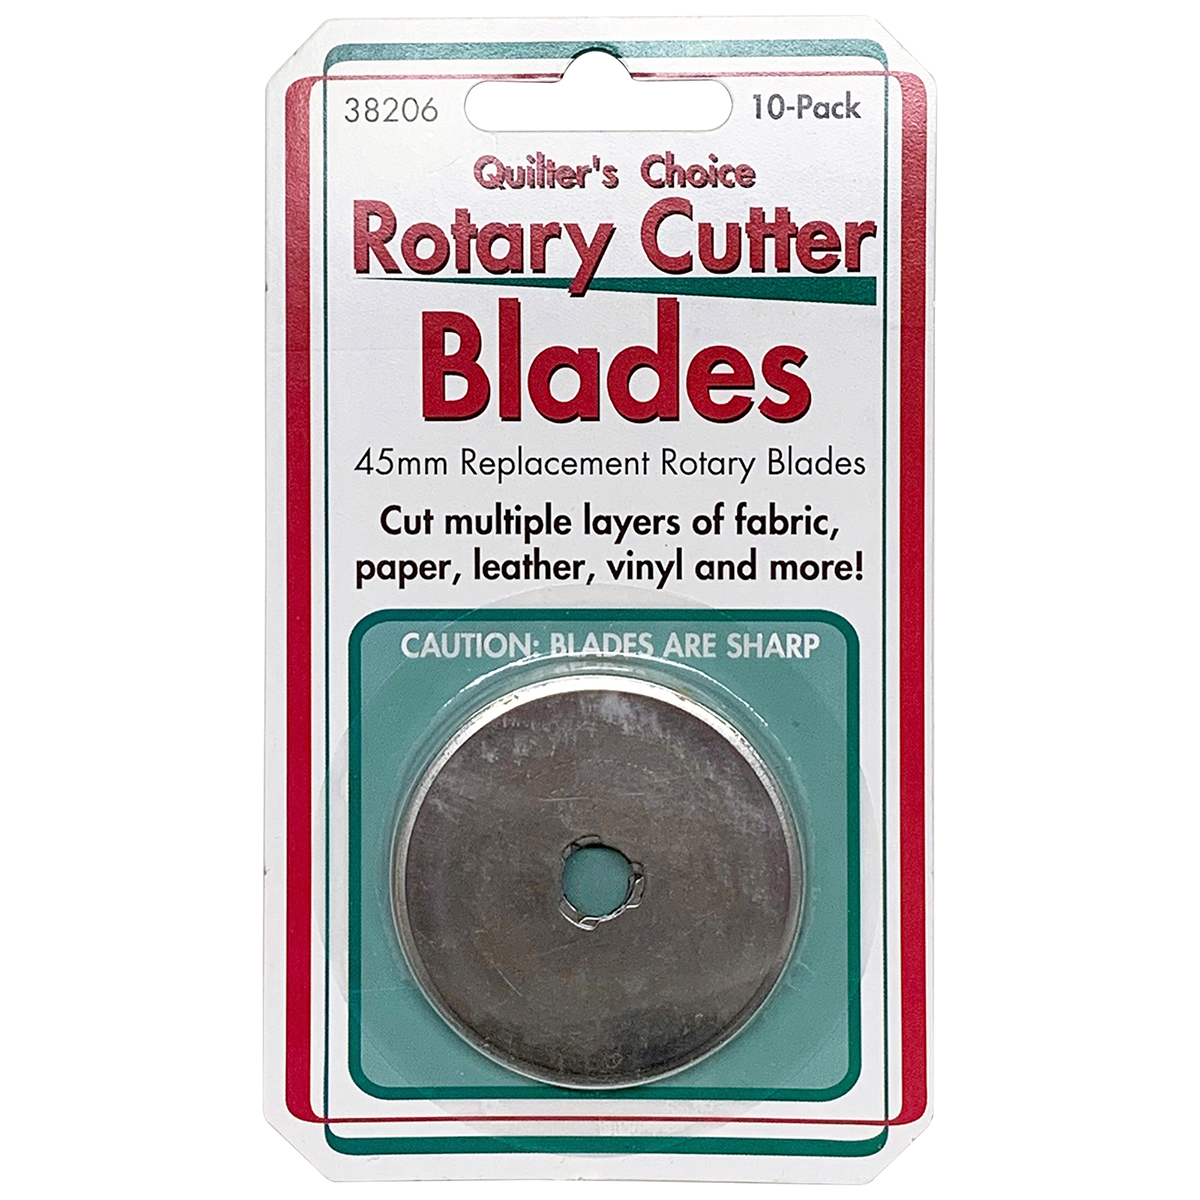 Straight Cut 5 Pack 45mm Rotary Blades, Allary #399